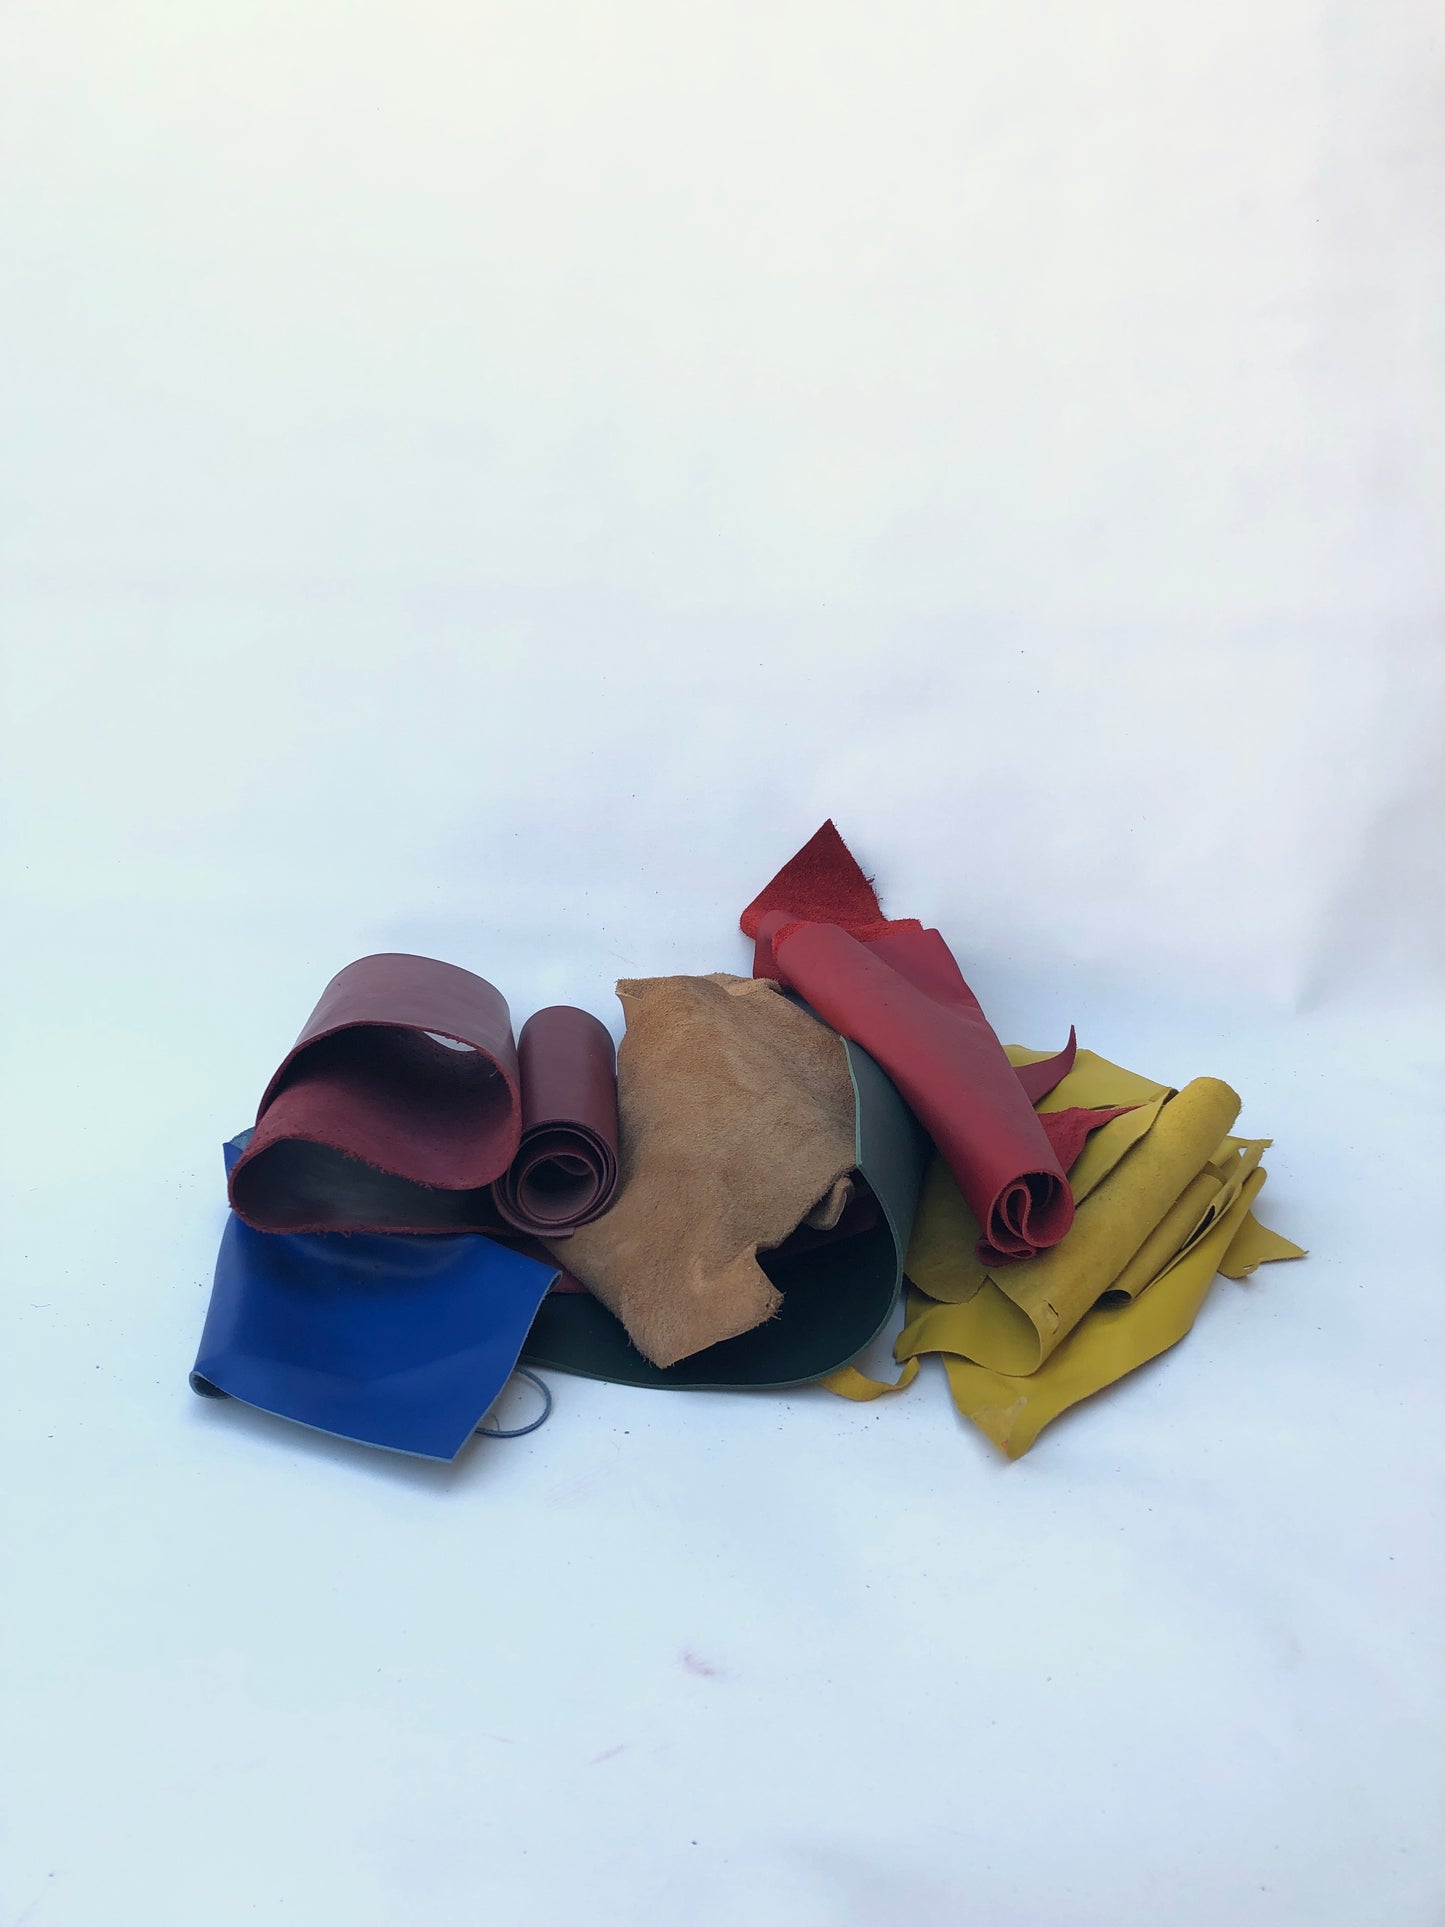 Leather Offcuts, Colour-mix Vegetable and Mineral Tanned